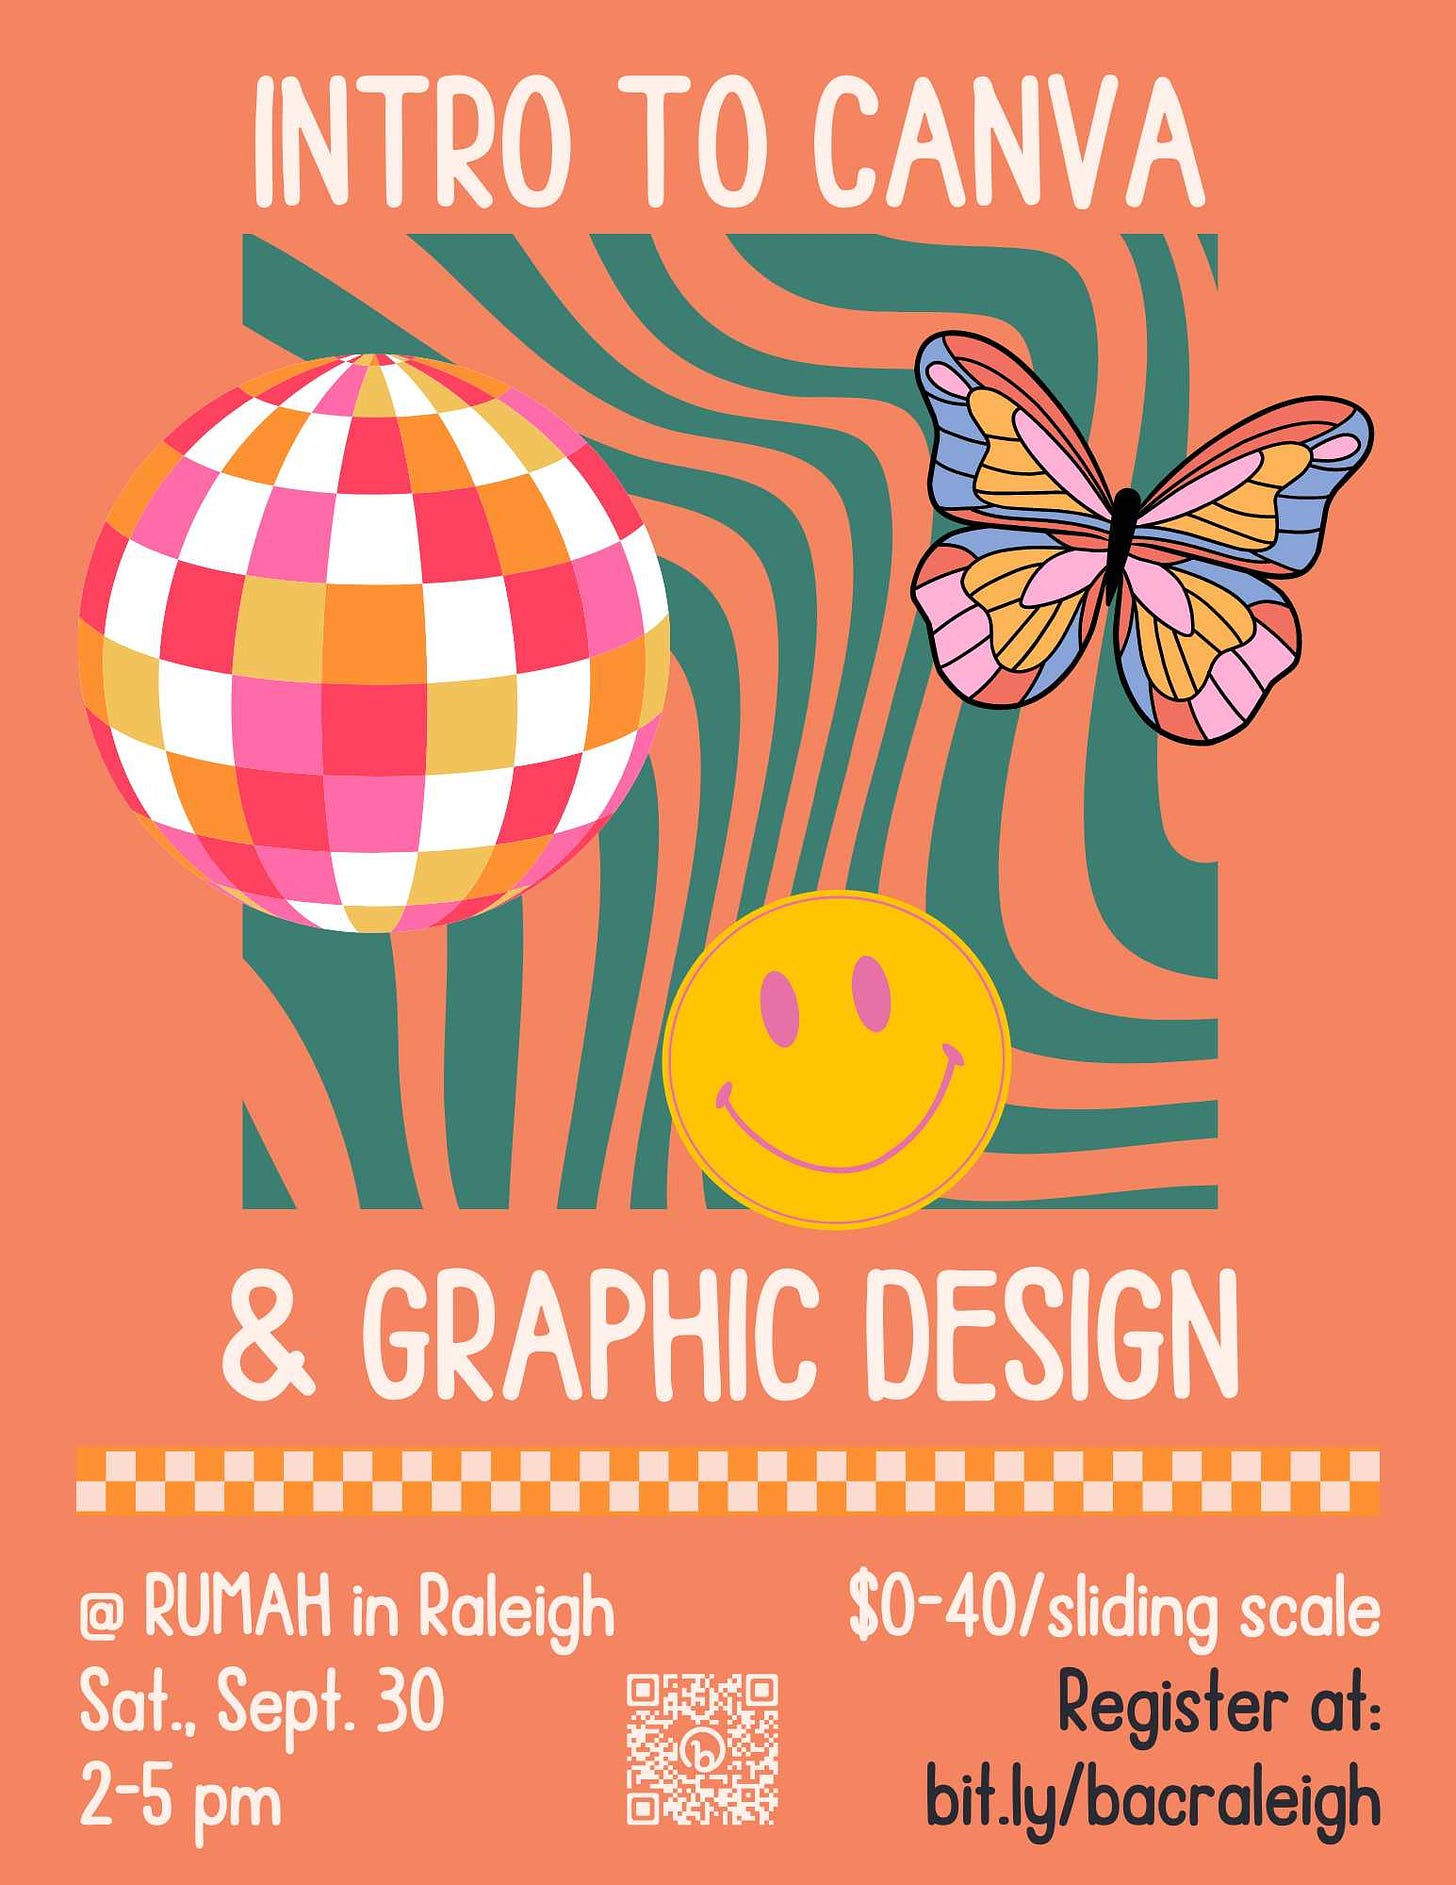 Promo poster for Intro to Canva and Grahphic Design